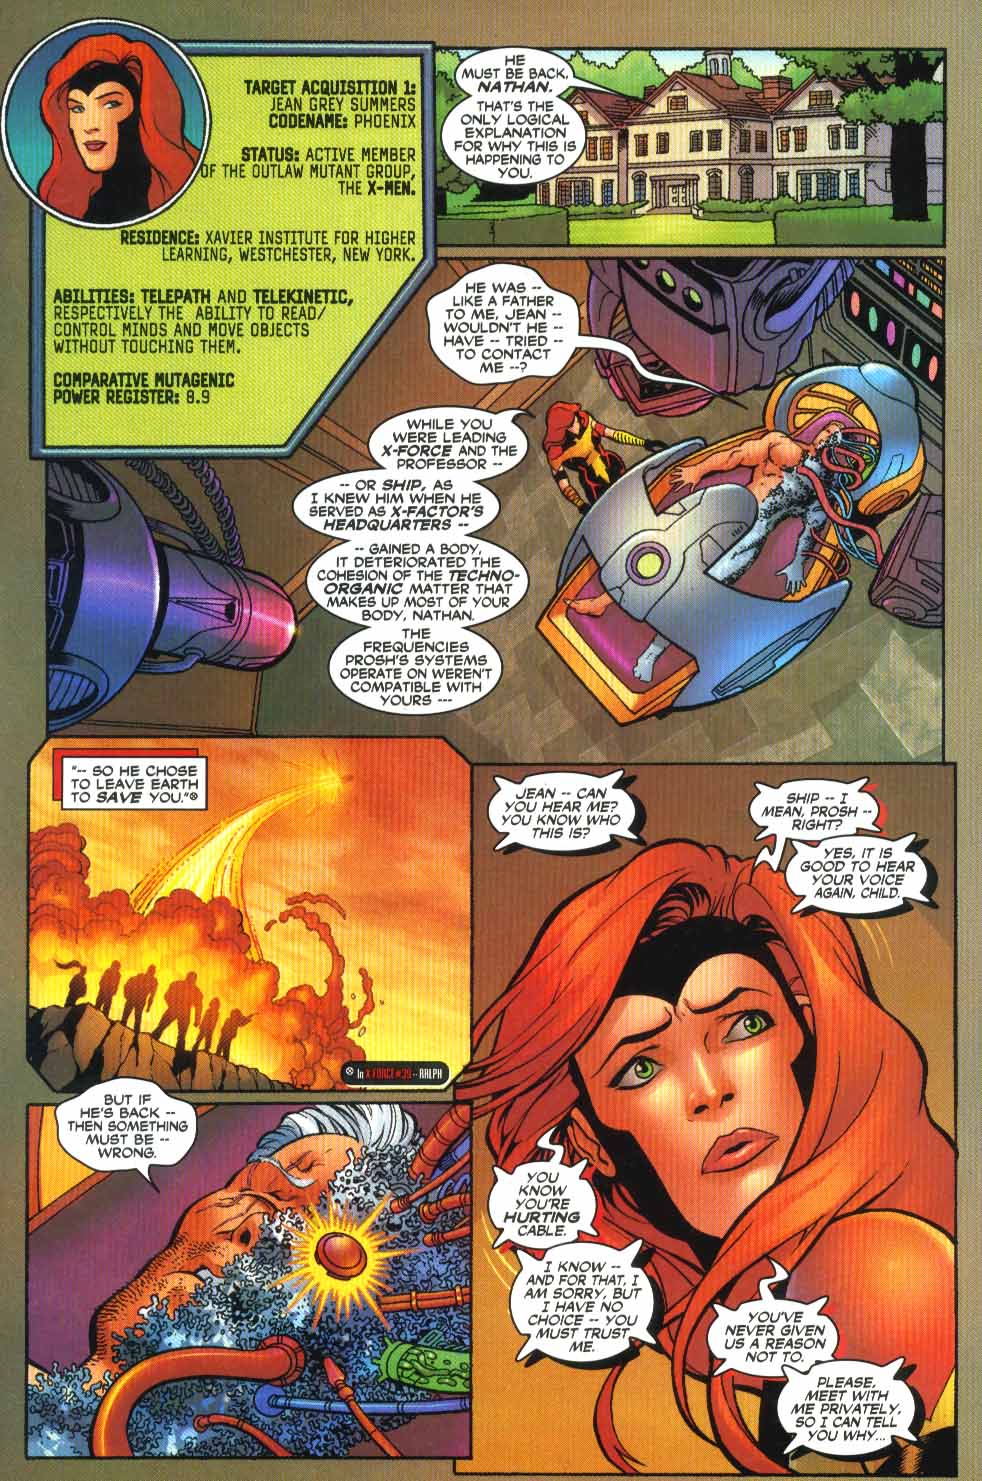 X-Men Forever (2001) 1 Page 11